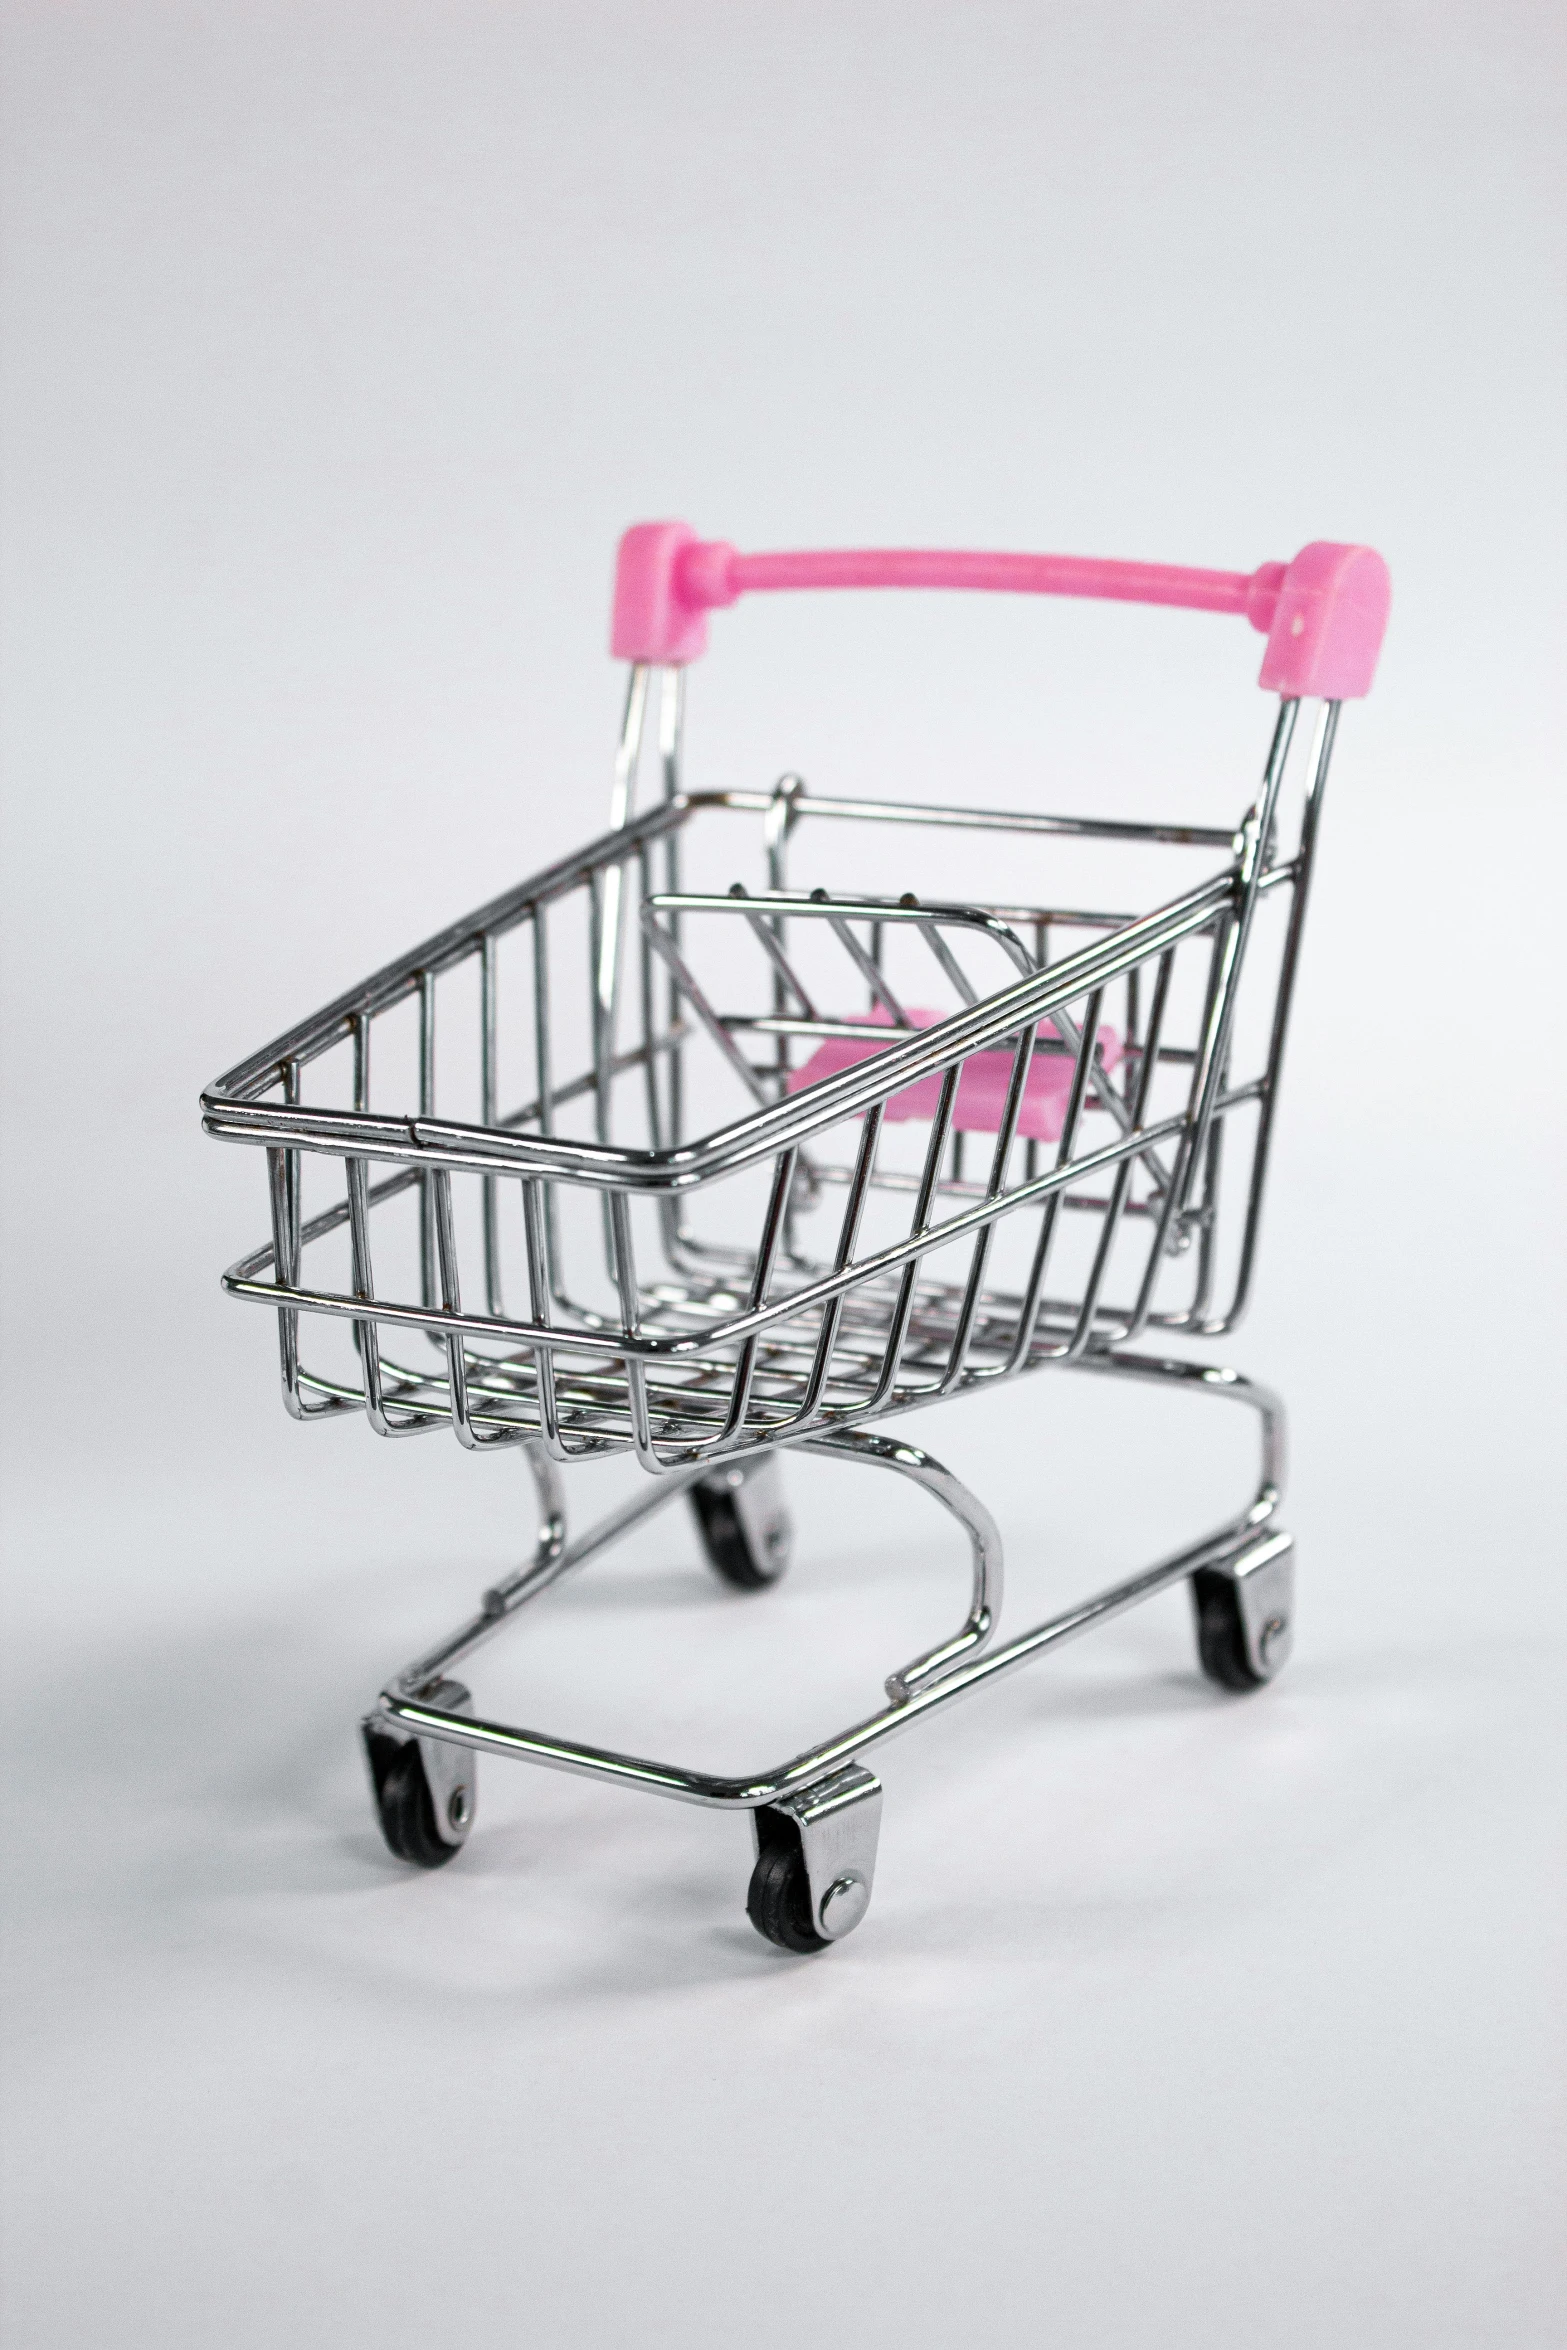 a pink shopping cart is sitting on the floor